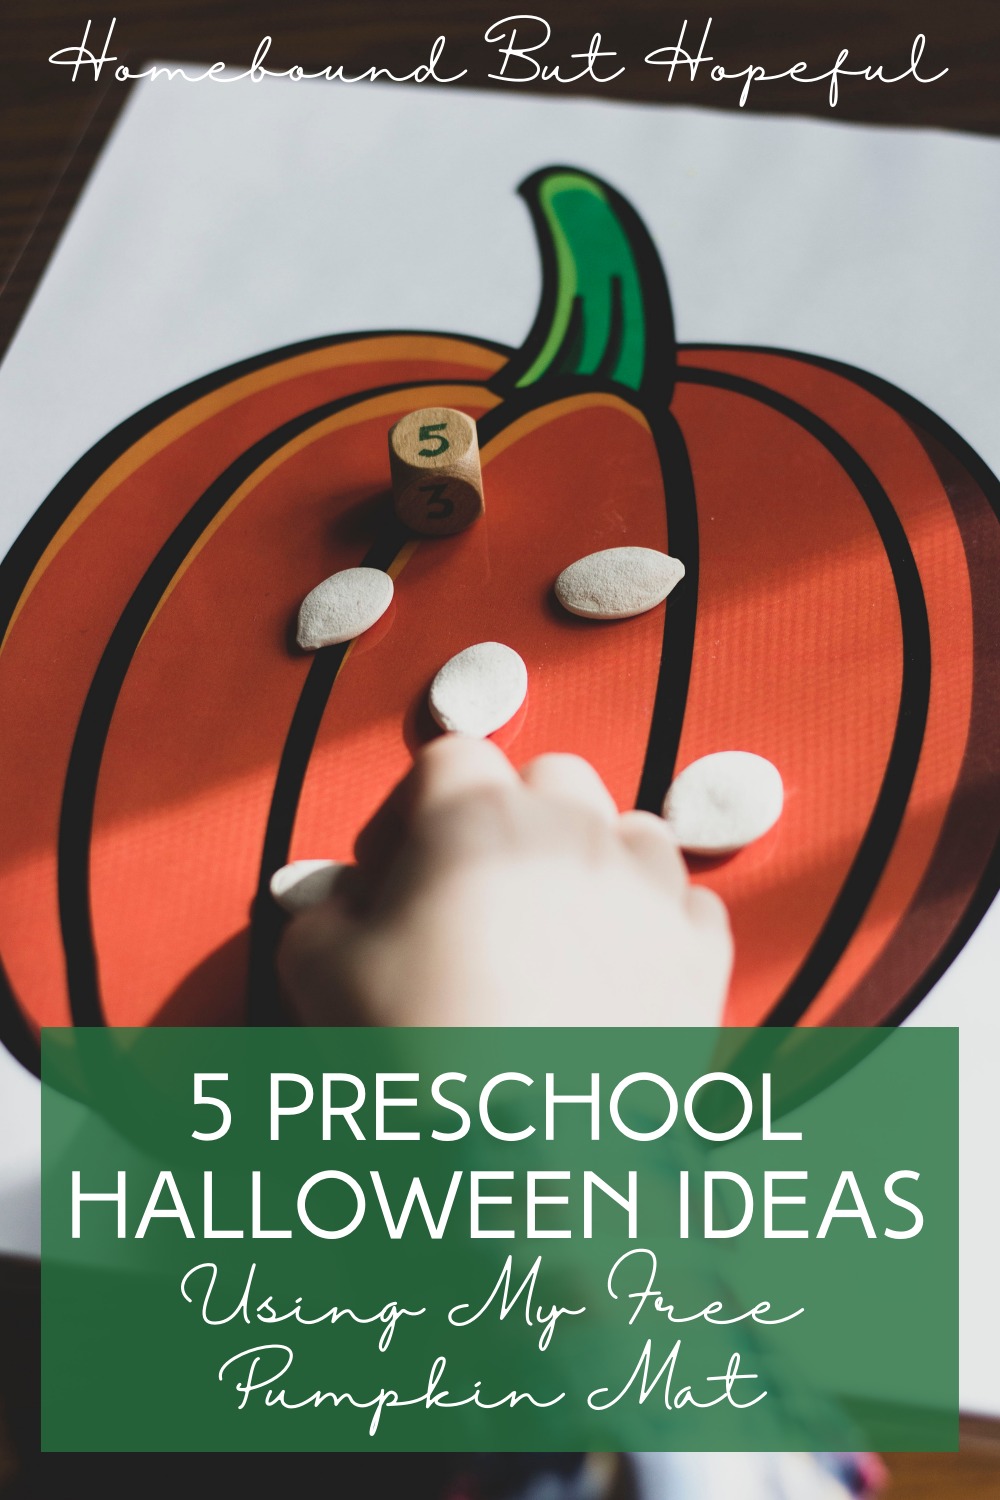 Looking for some festive, fun, AND educational ideas for spooky season? I've got you covered with these 5 Halloween preschool ideas!